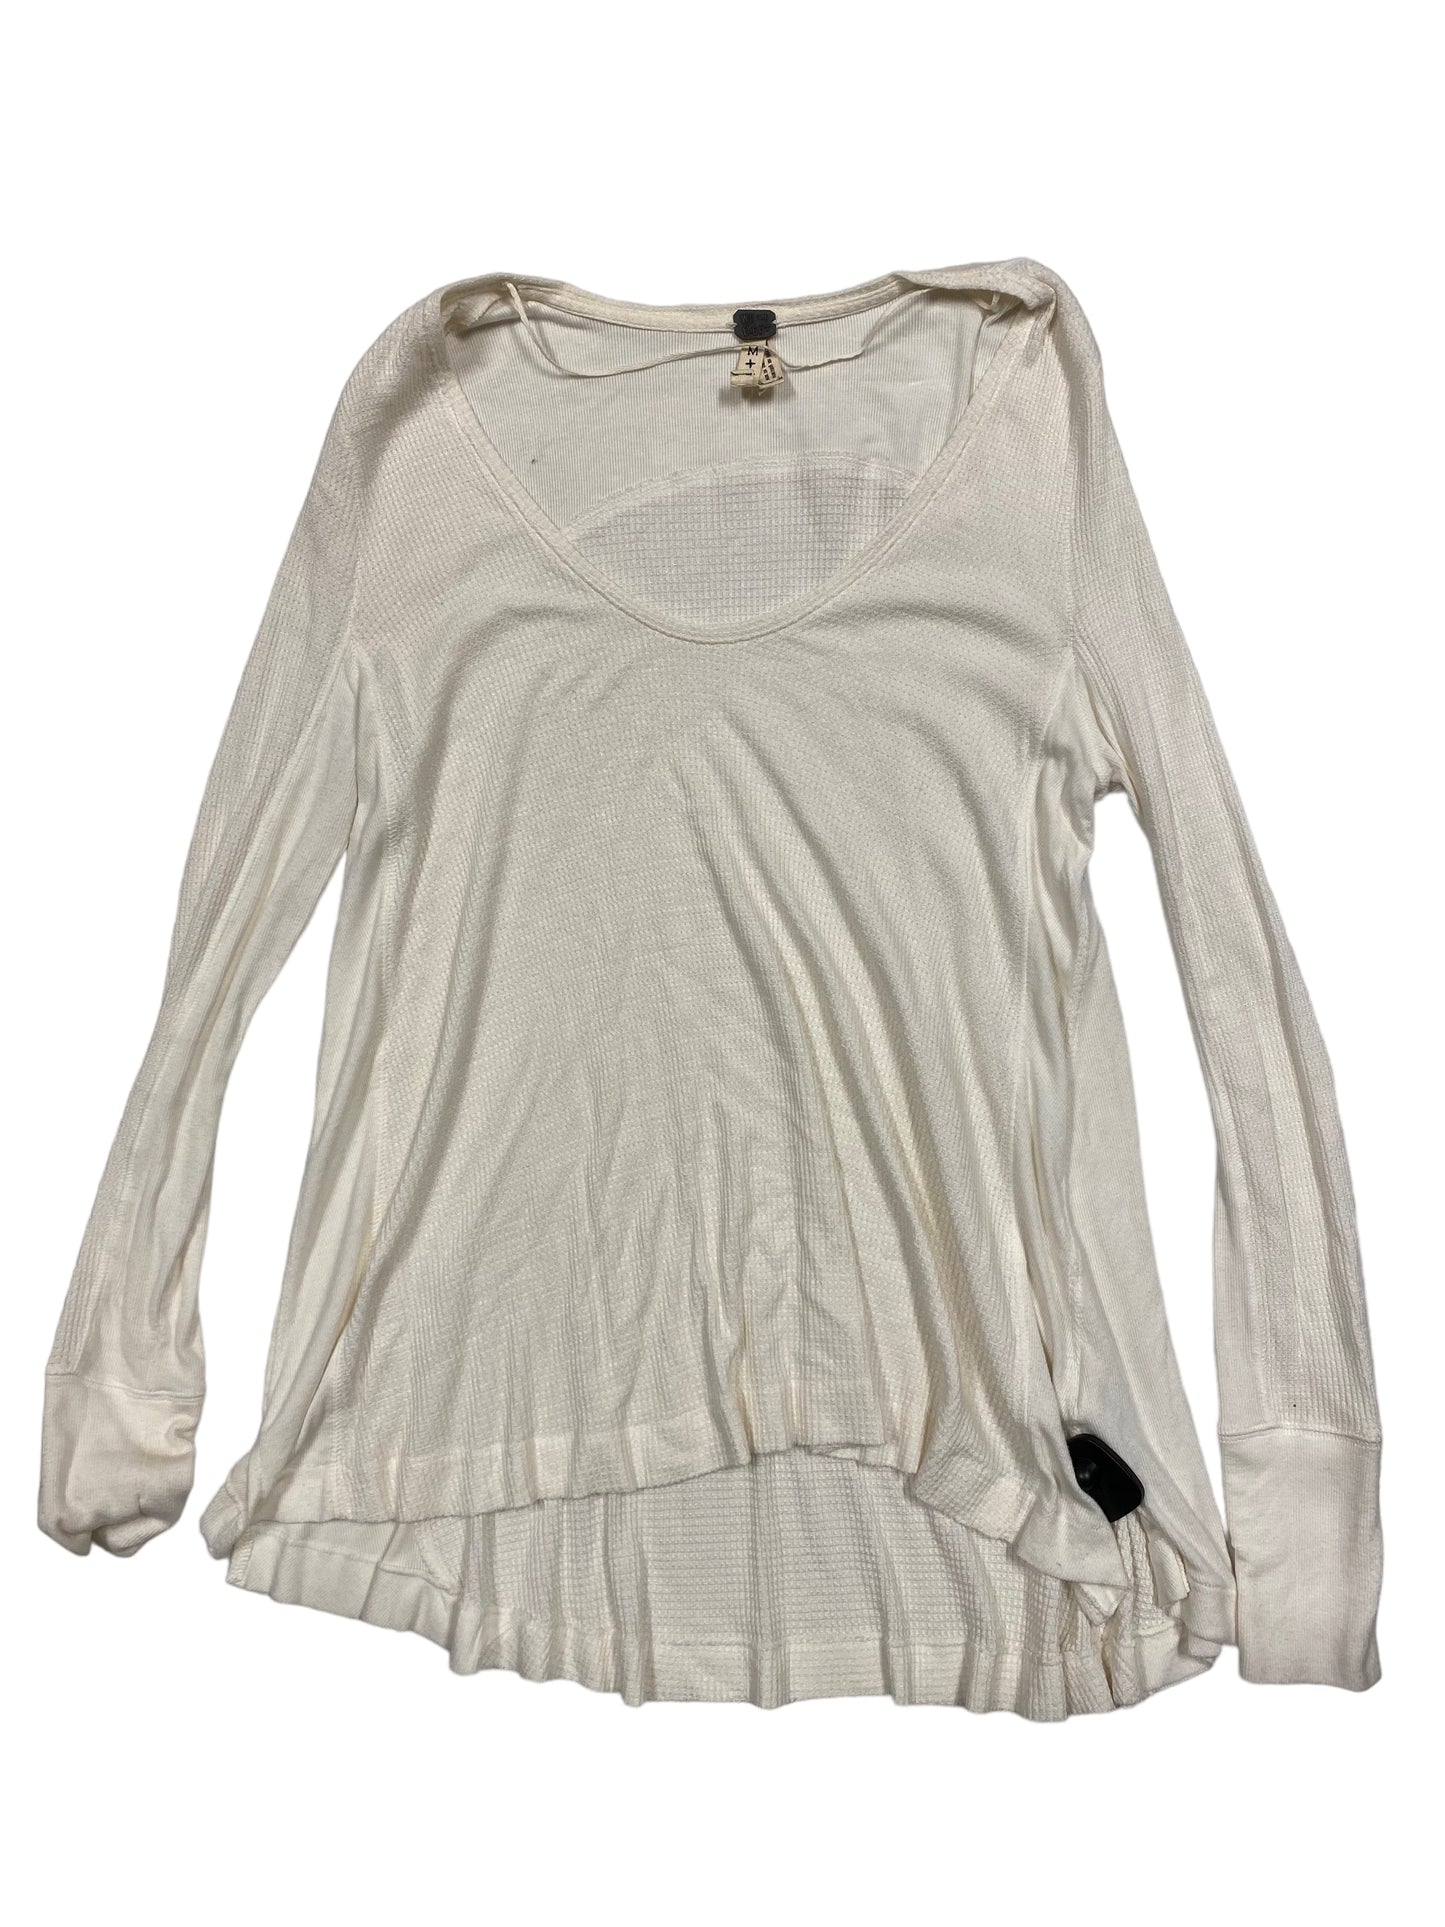 Cream Top Long Sleeve Free People, Size M